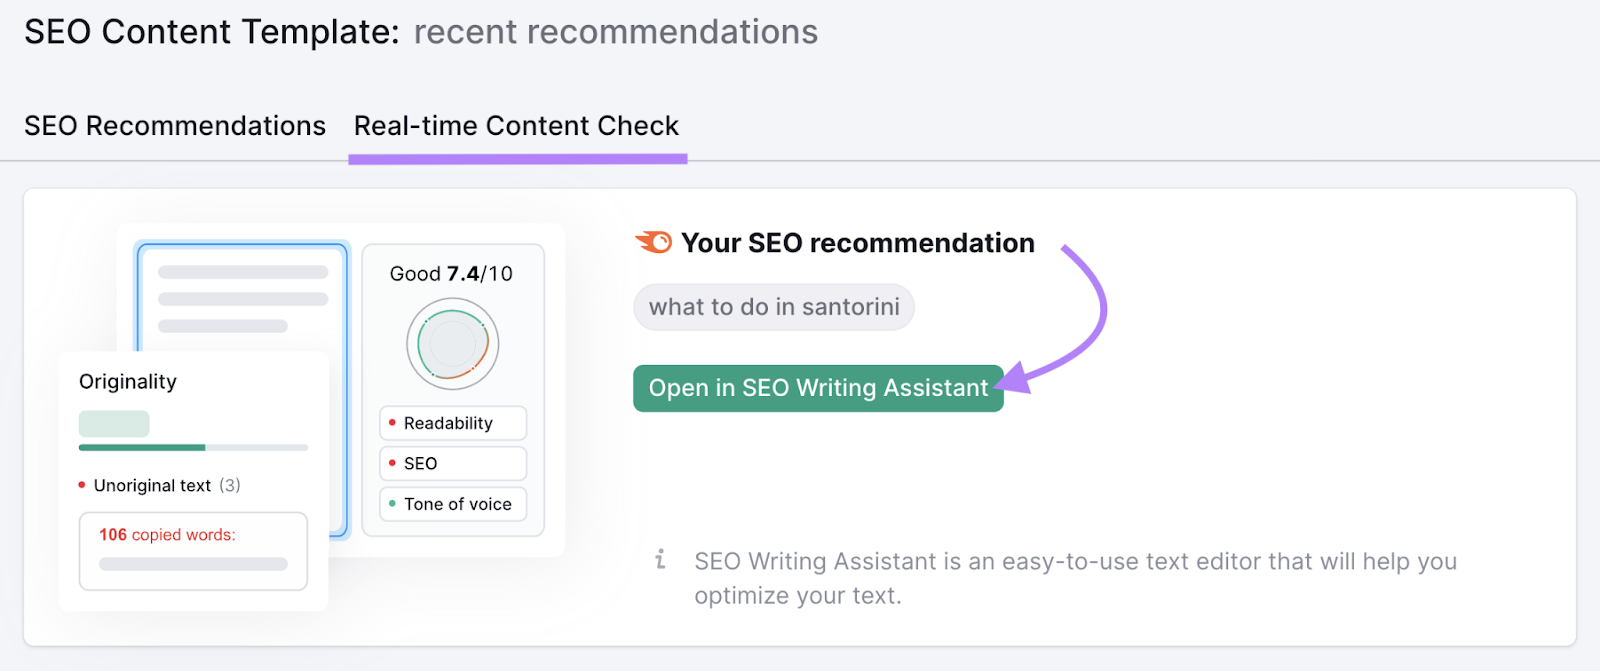 “Open in SEO Writing Assistant" button highlighted